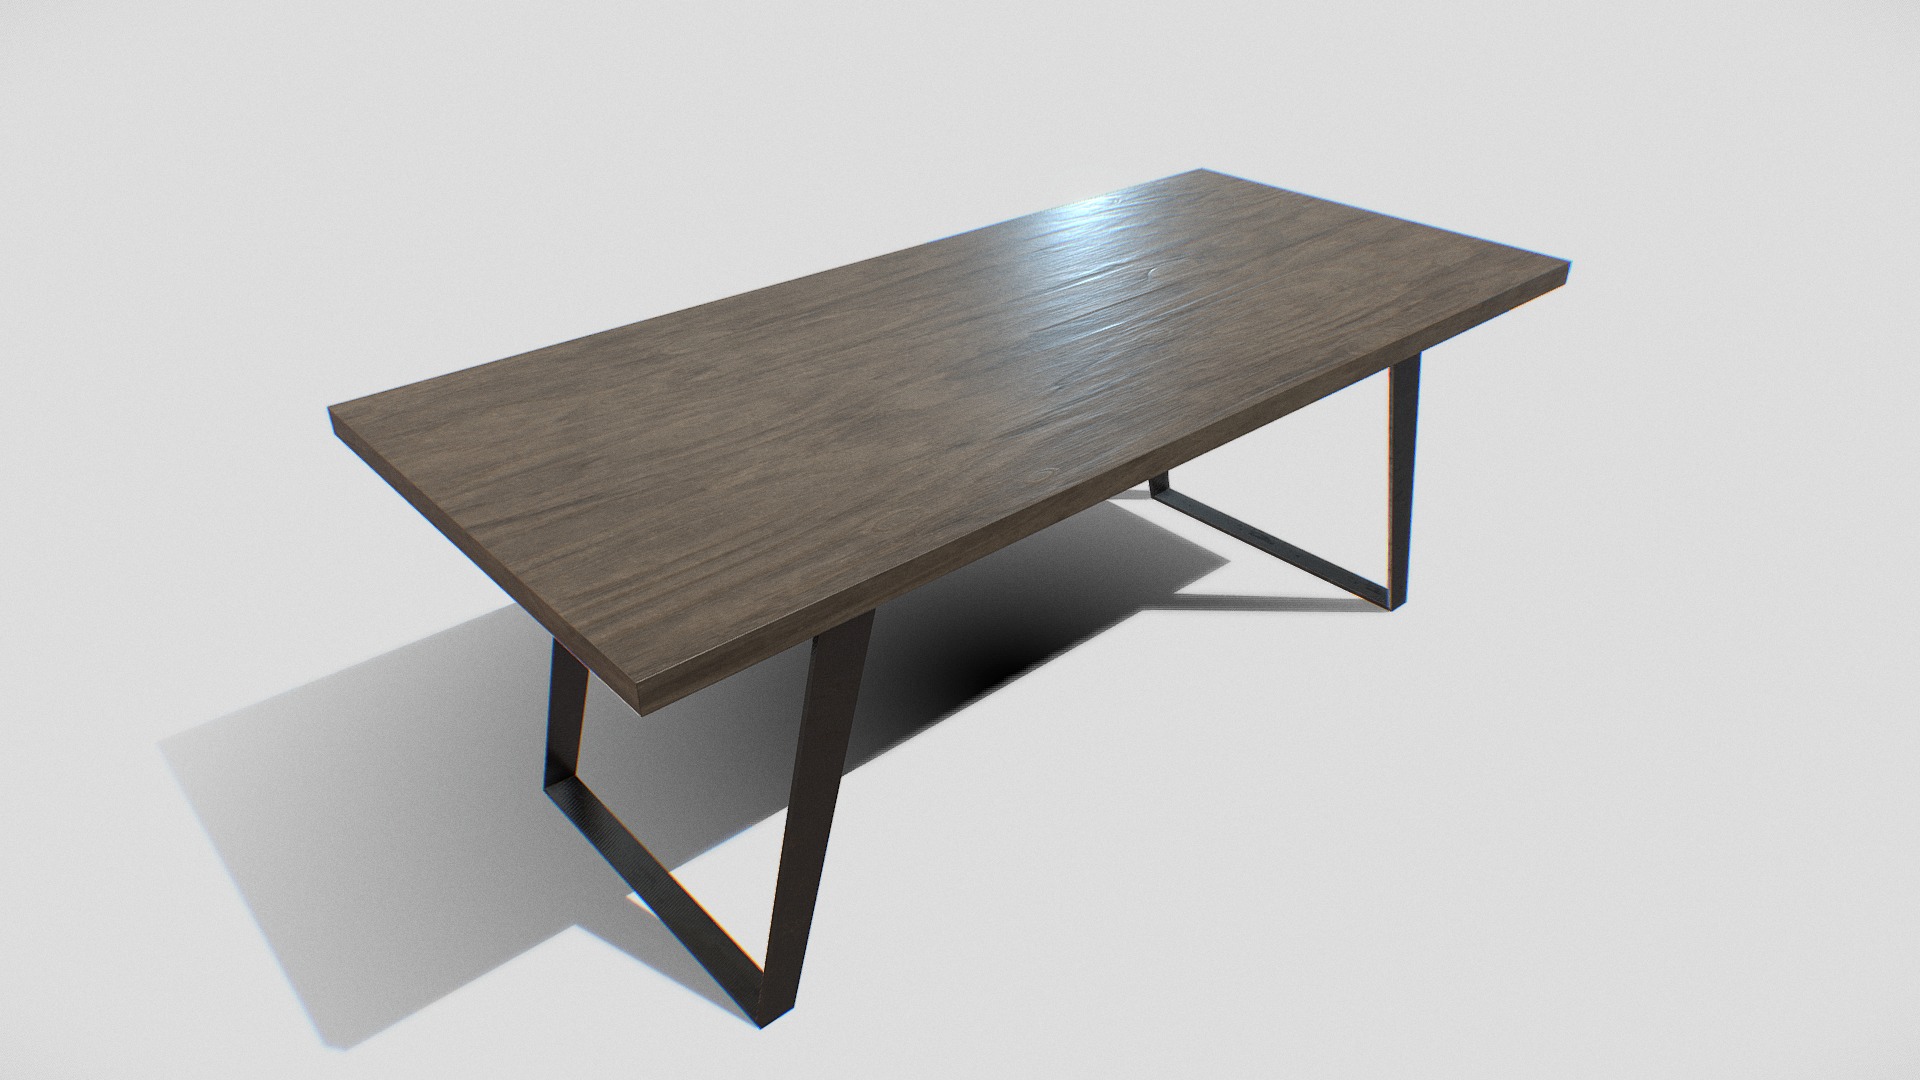 3D model Table wooden 13 - This is a 3D model of the Table wooden 13. The 3D model is about a wooden table with legs.